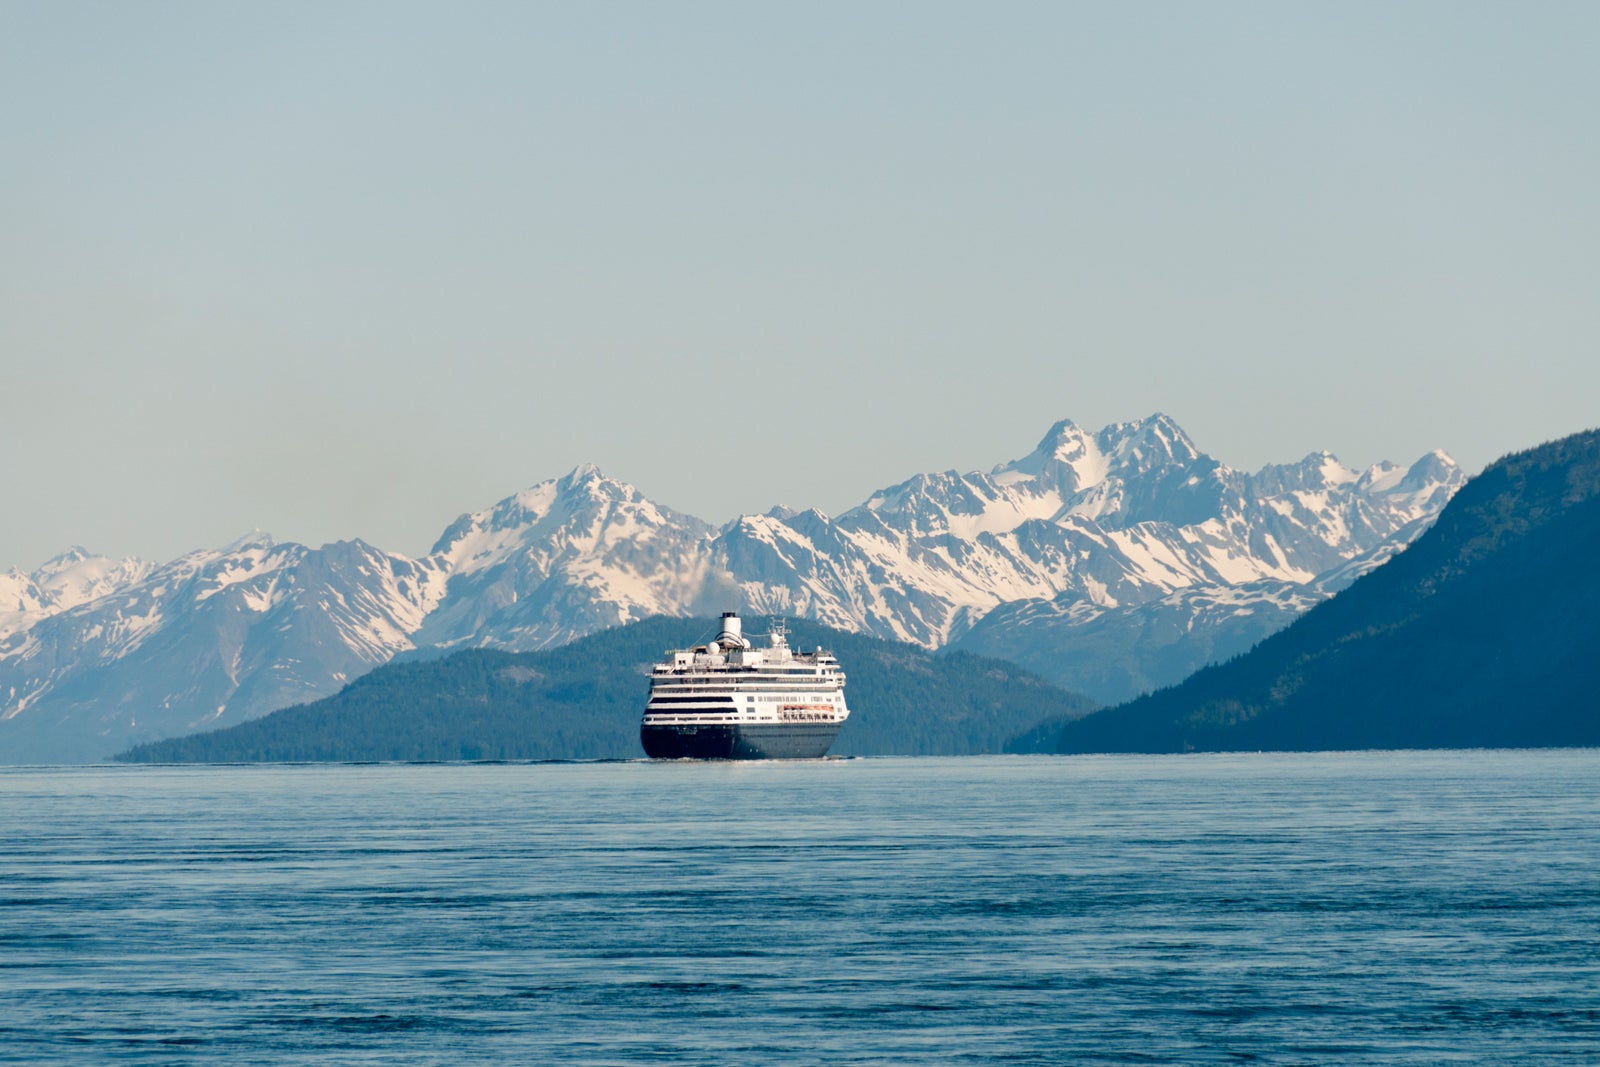 cruise ship sails in the water with snow-capped mountains in the background